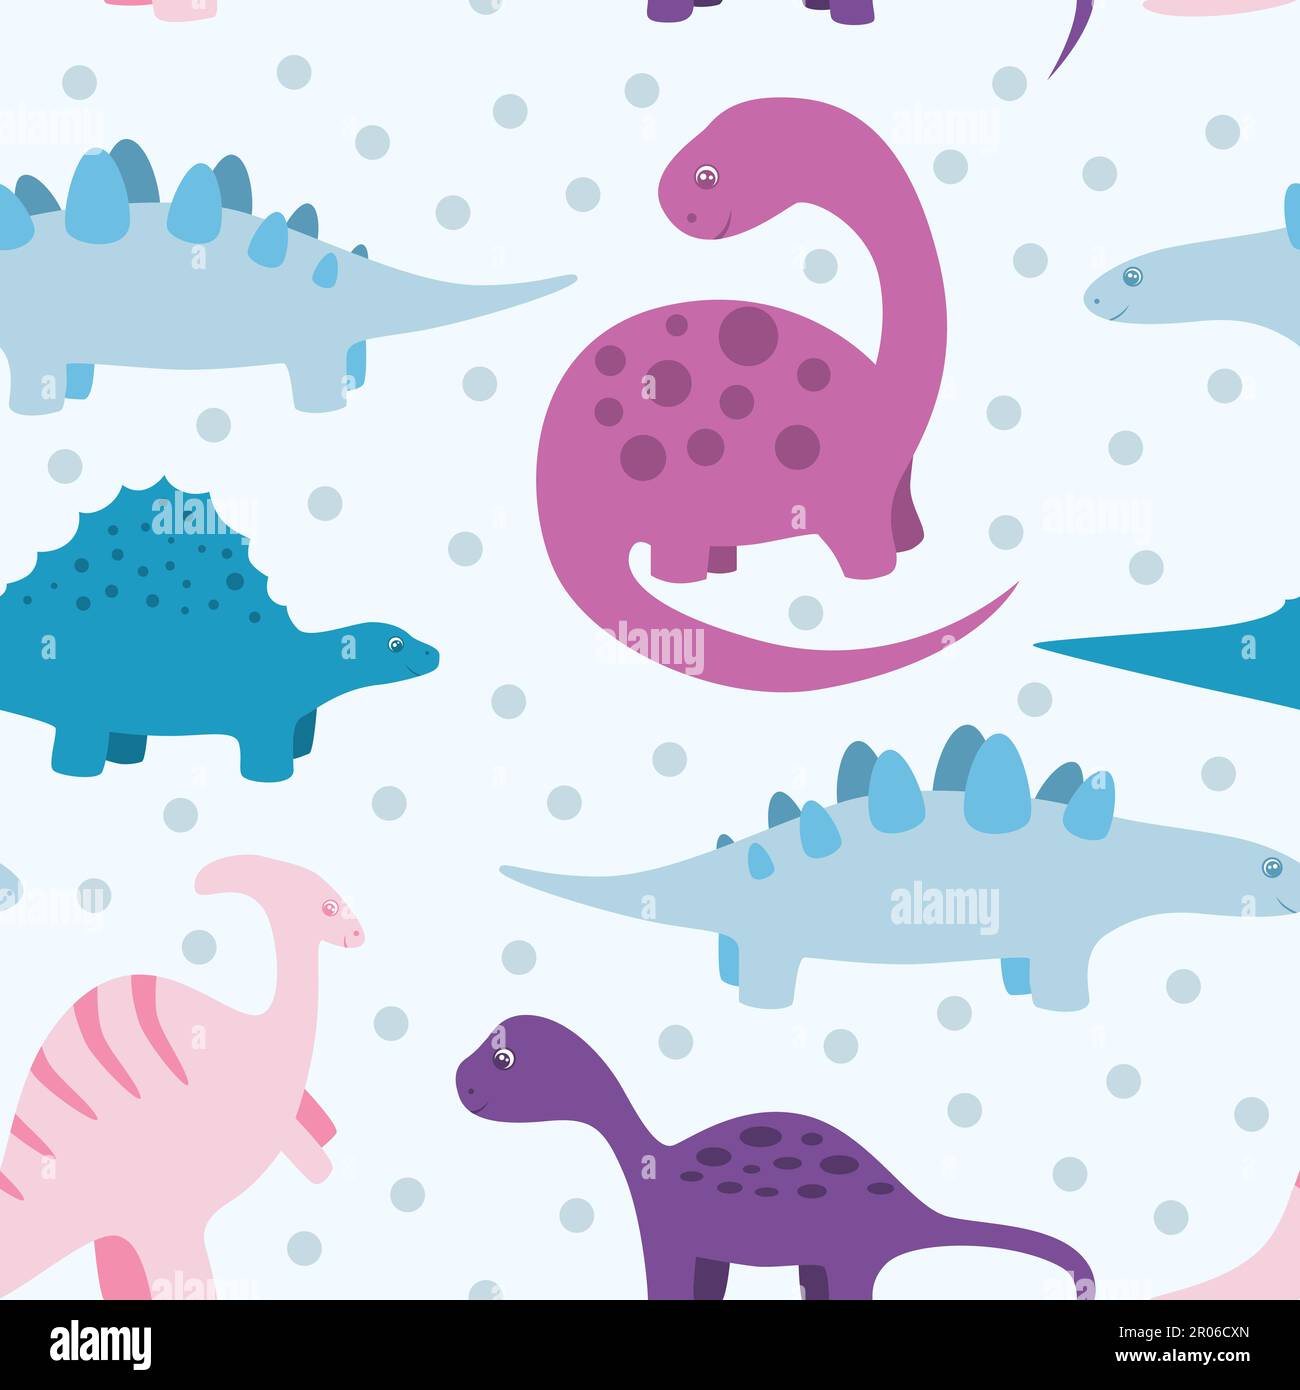 Purple Dinosaur Images Browse 4413 Stock Photos  Vectors Free Download  with Trial  Shutterstock